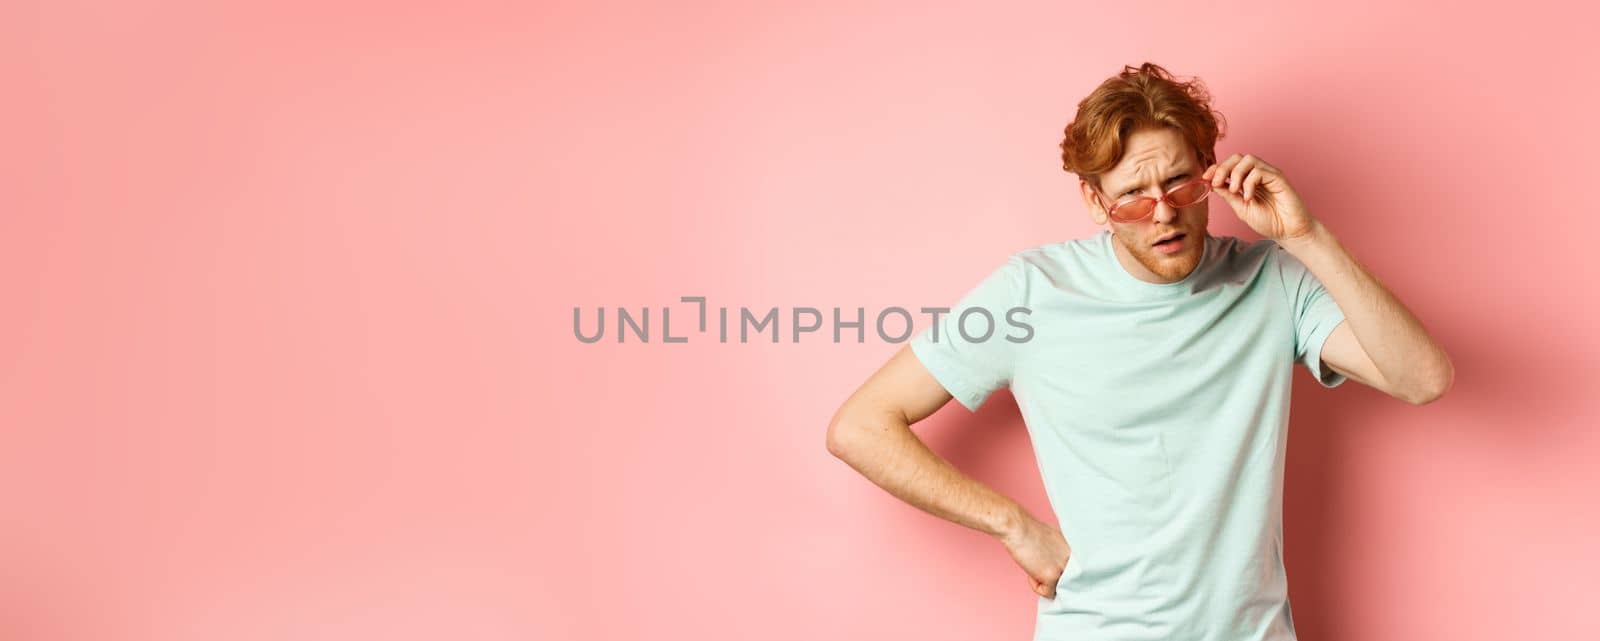 Tourism and vacation concept. Confused funny guy with red messy hair and beard, take-off glasses and frowning puzzled, standing over pink background.